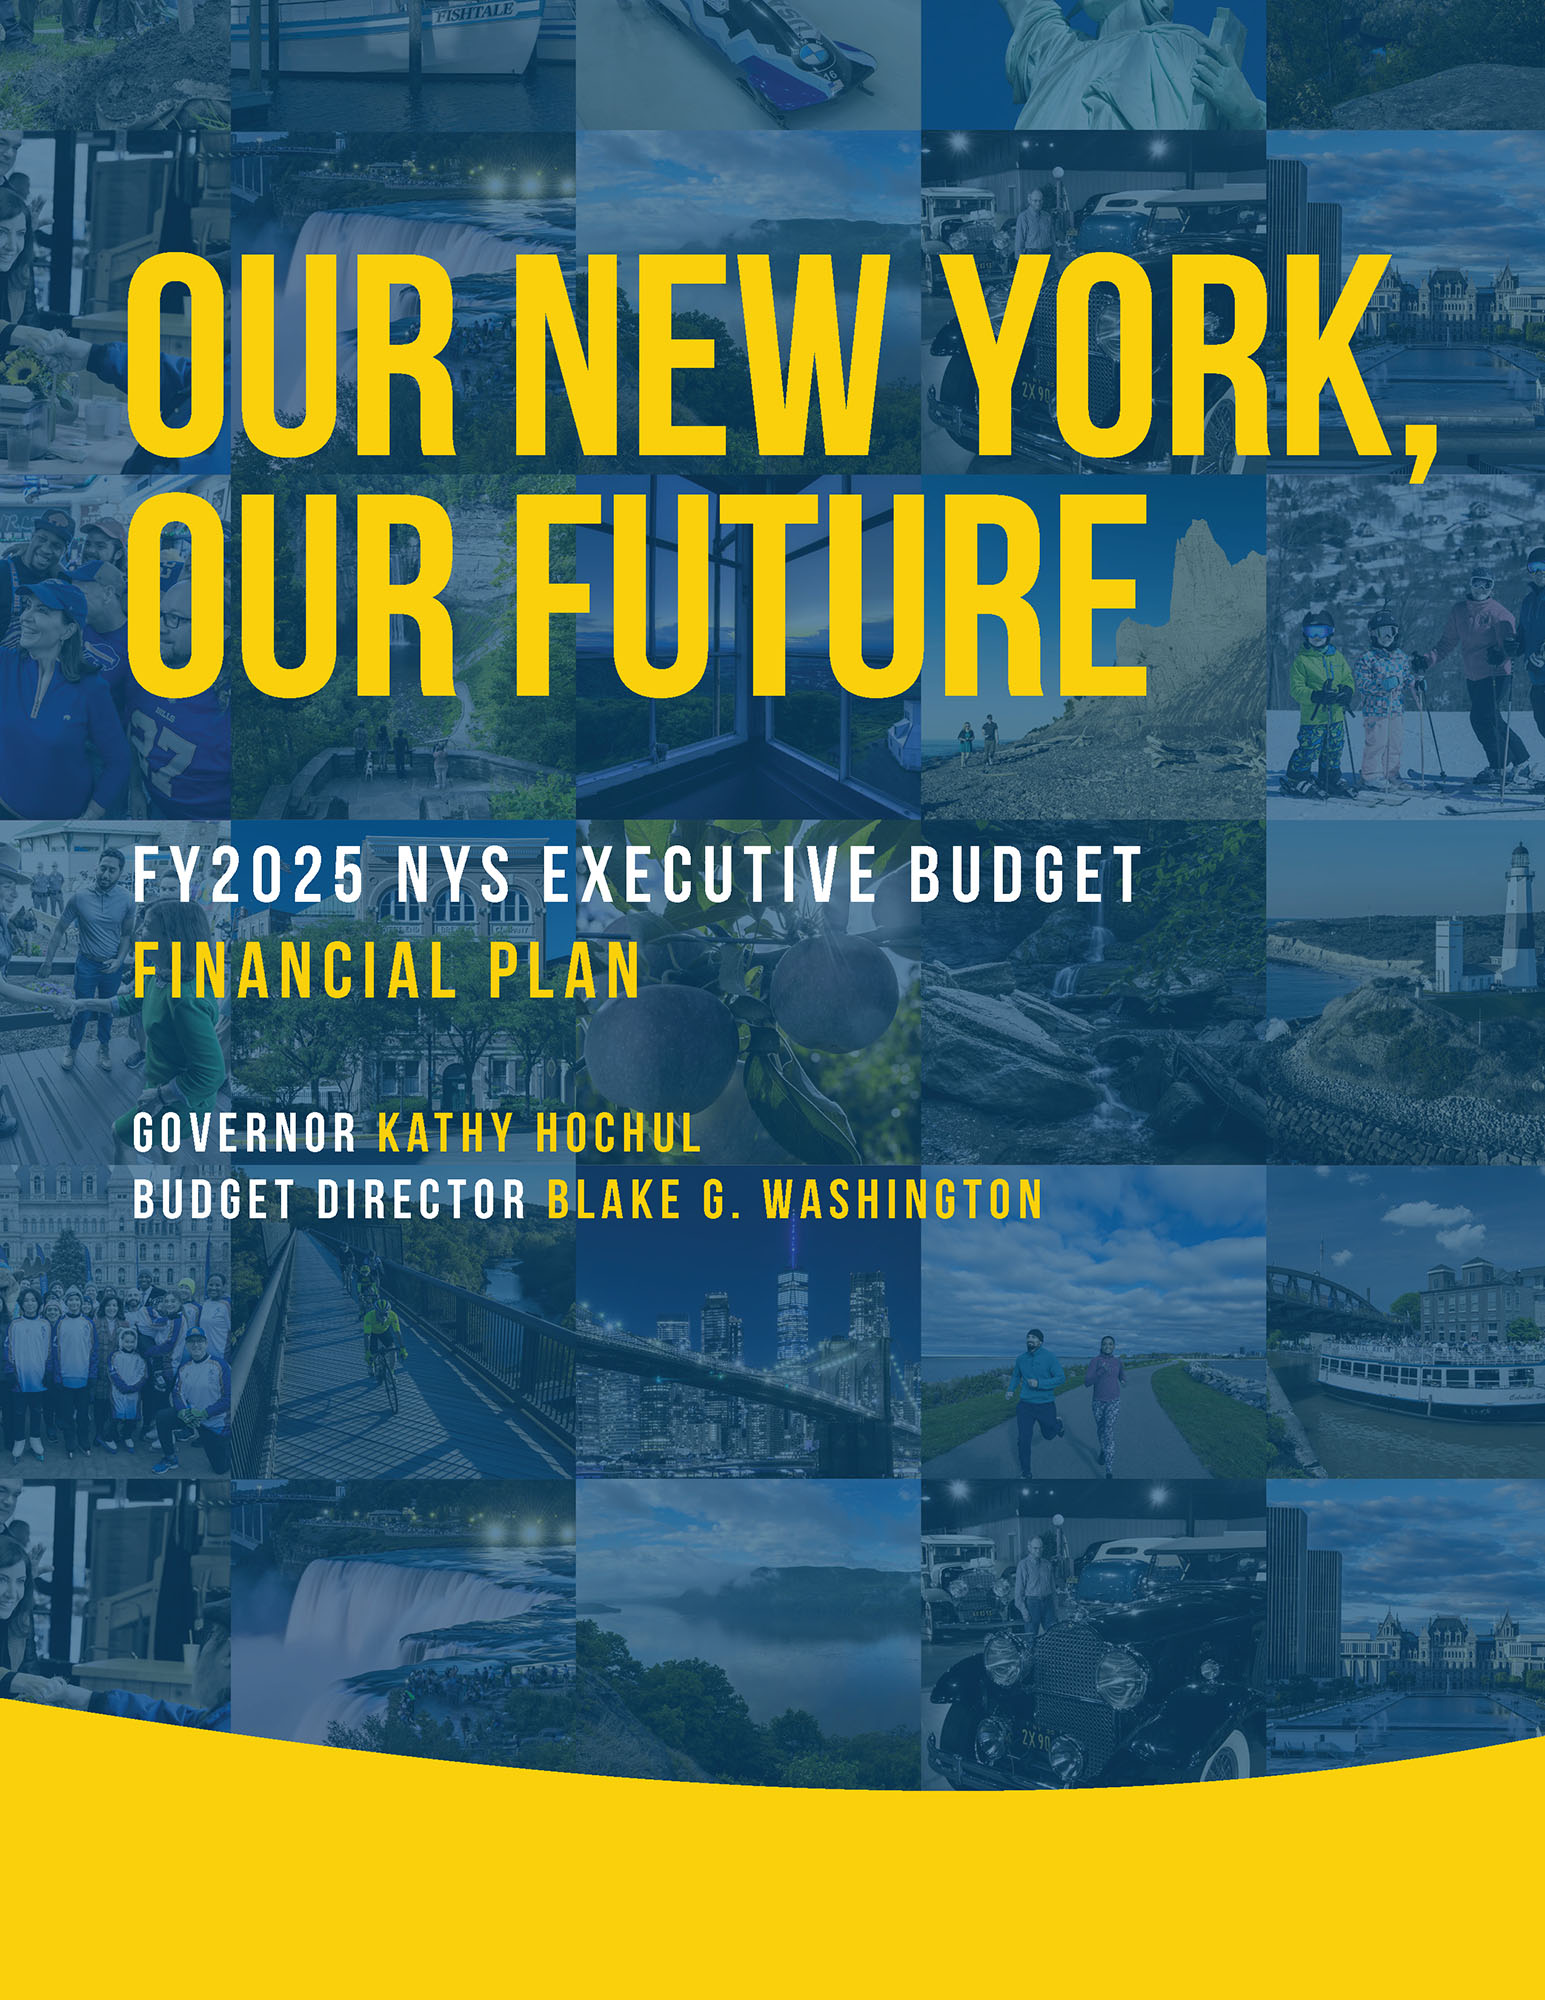 FY 2025 Financial Plan Cover